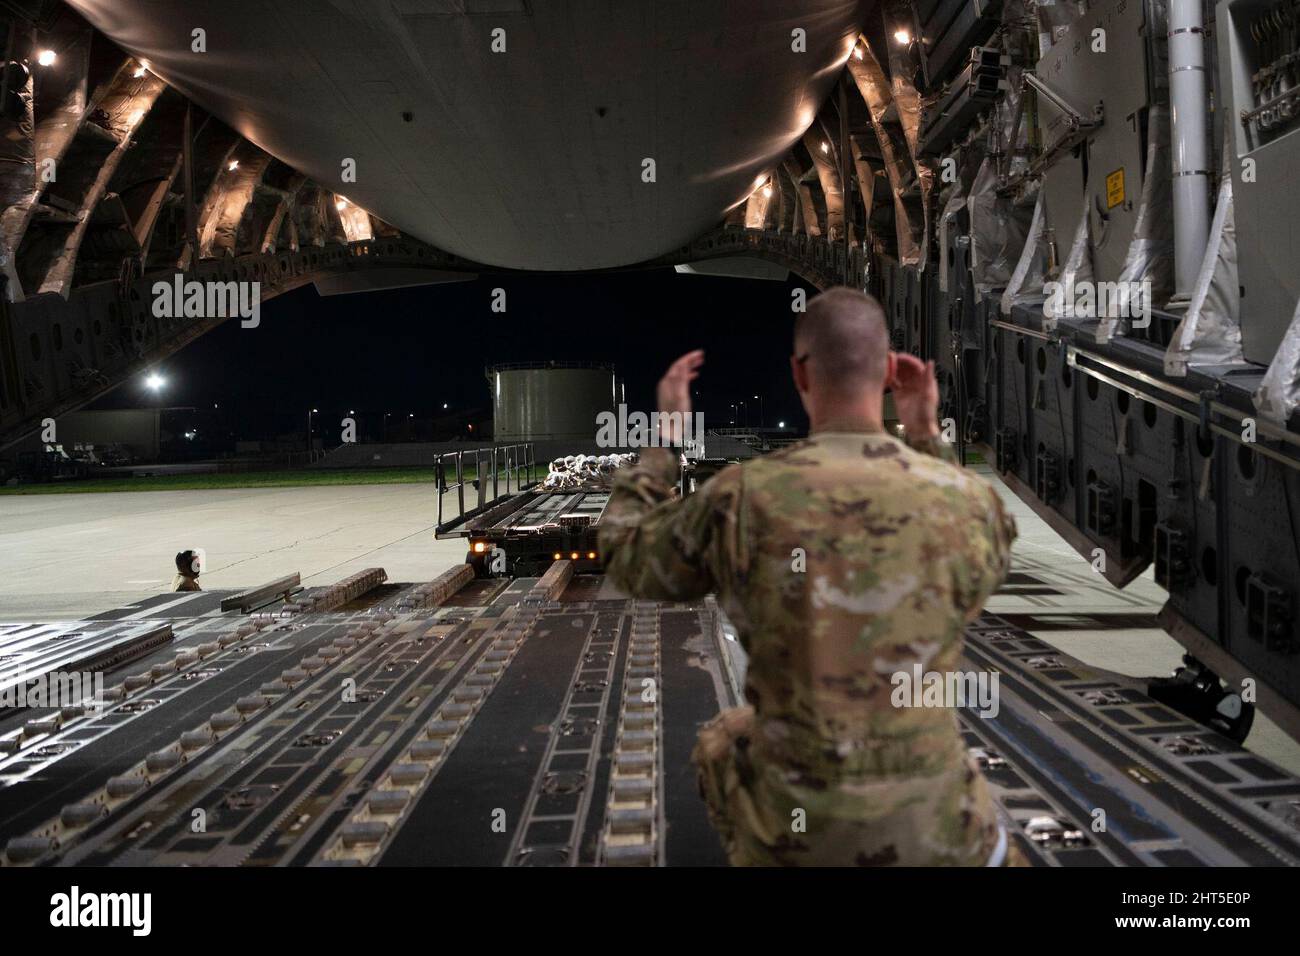 February 24, 2022 - Travis Air Force Base, California, USA: U.S. Air Force Airman 1st Class Chase Smith, 8th Airlift Squadron loadmaster, marshals a K-loader toward a C-17 Globemaster III assigned to Joint Base Lewis-McChord, Washington, at Travis Air Force Base, California, Feb. 14, 2022. U.S. Airmen with the 60th Aerial Port Squadron and 8th Airlift Squadron loaded cargo to the C-17. K-loaders are used to transport cargo into and out of aircraft. Under the direction of U.S. Under the direction of U.S. Transportation Command, the 60th Air Mobility Wing supported the 621st Contingency Respons Stock Photo